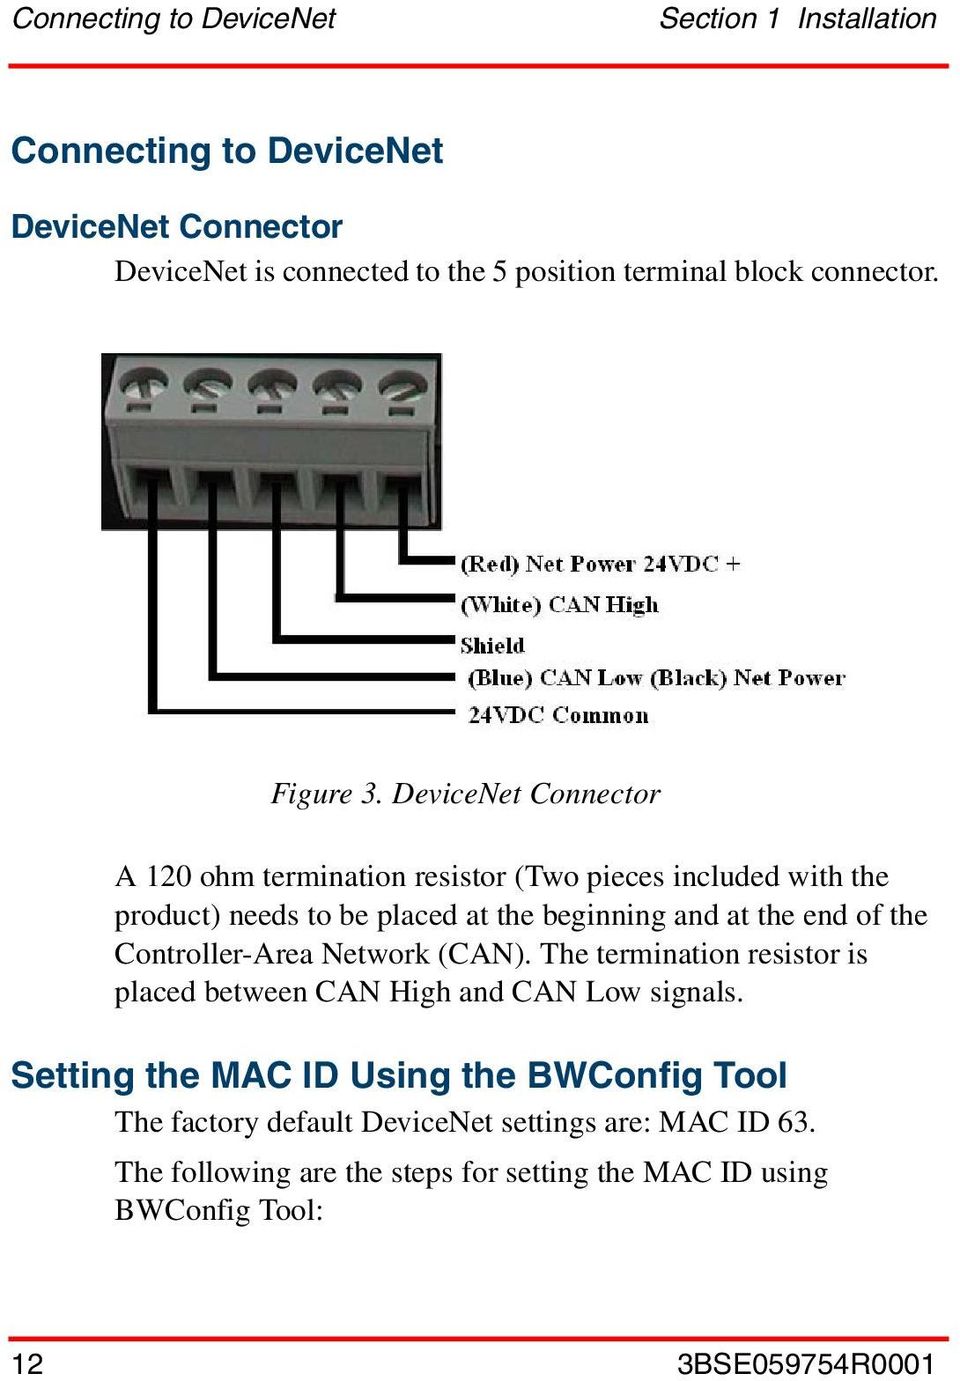 DeviceNet Connector A 120 ohm termination resistor (Two pieces included with the product) needs to be placed at the beginning and at the end of the